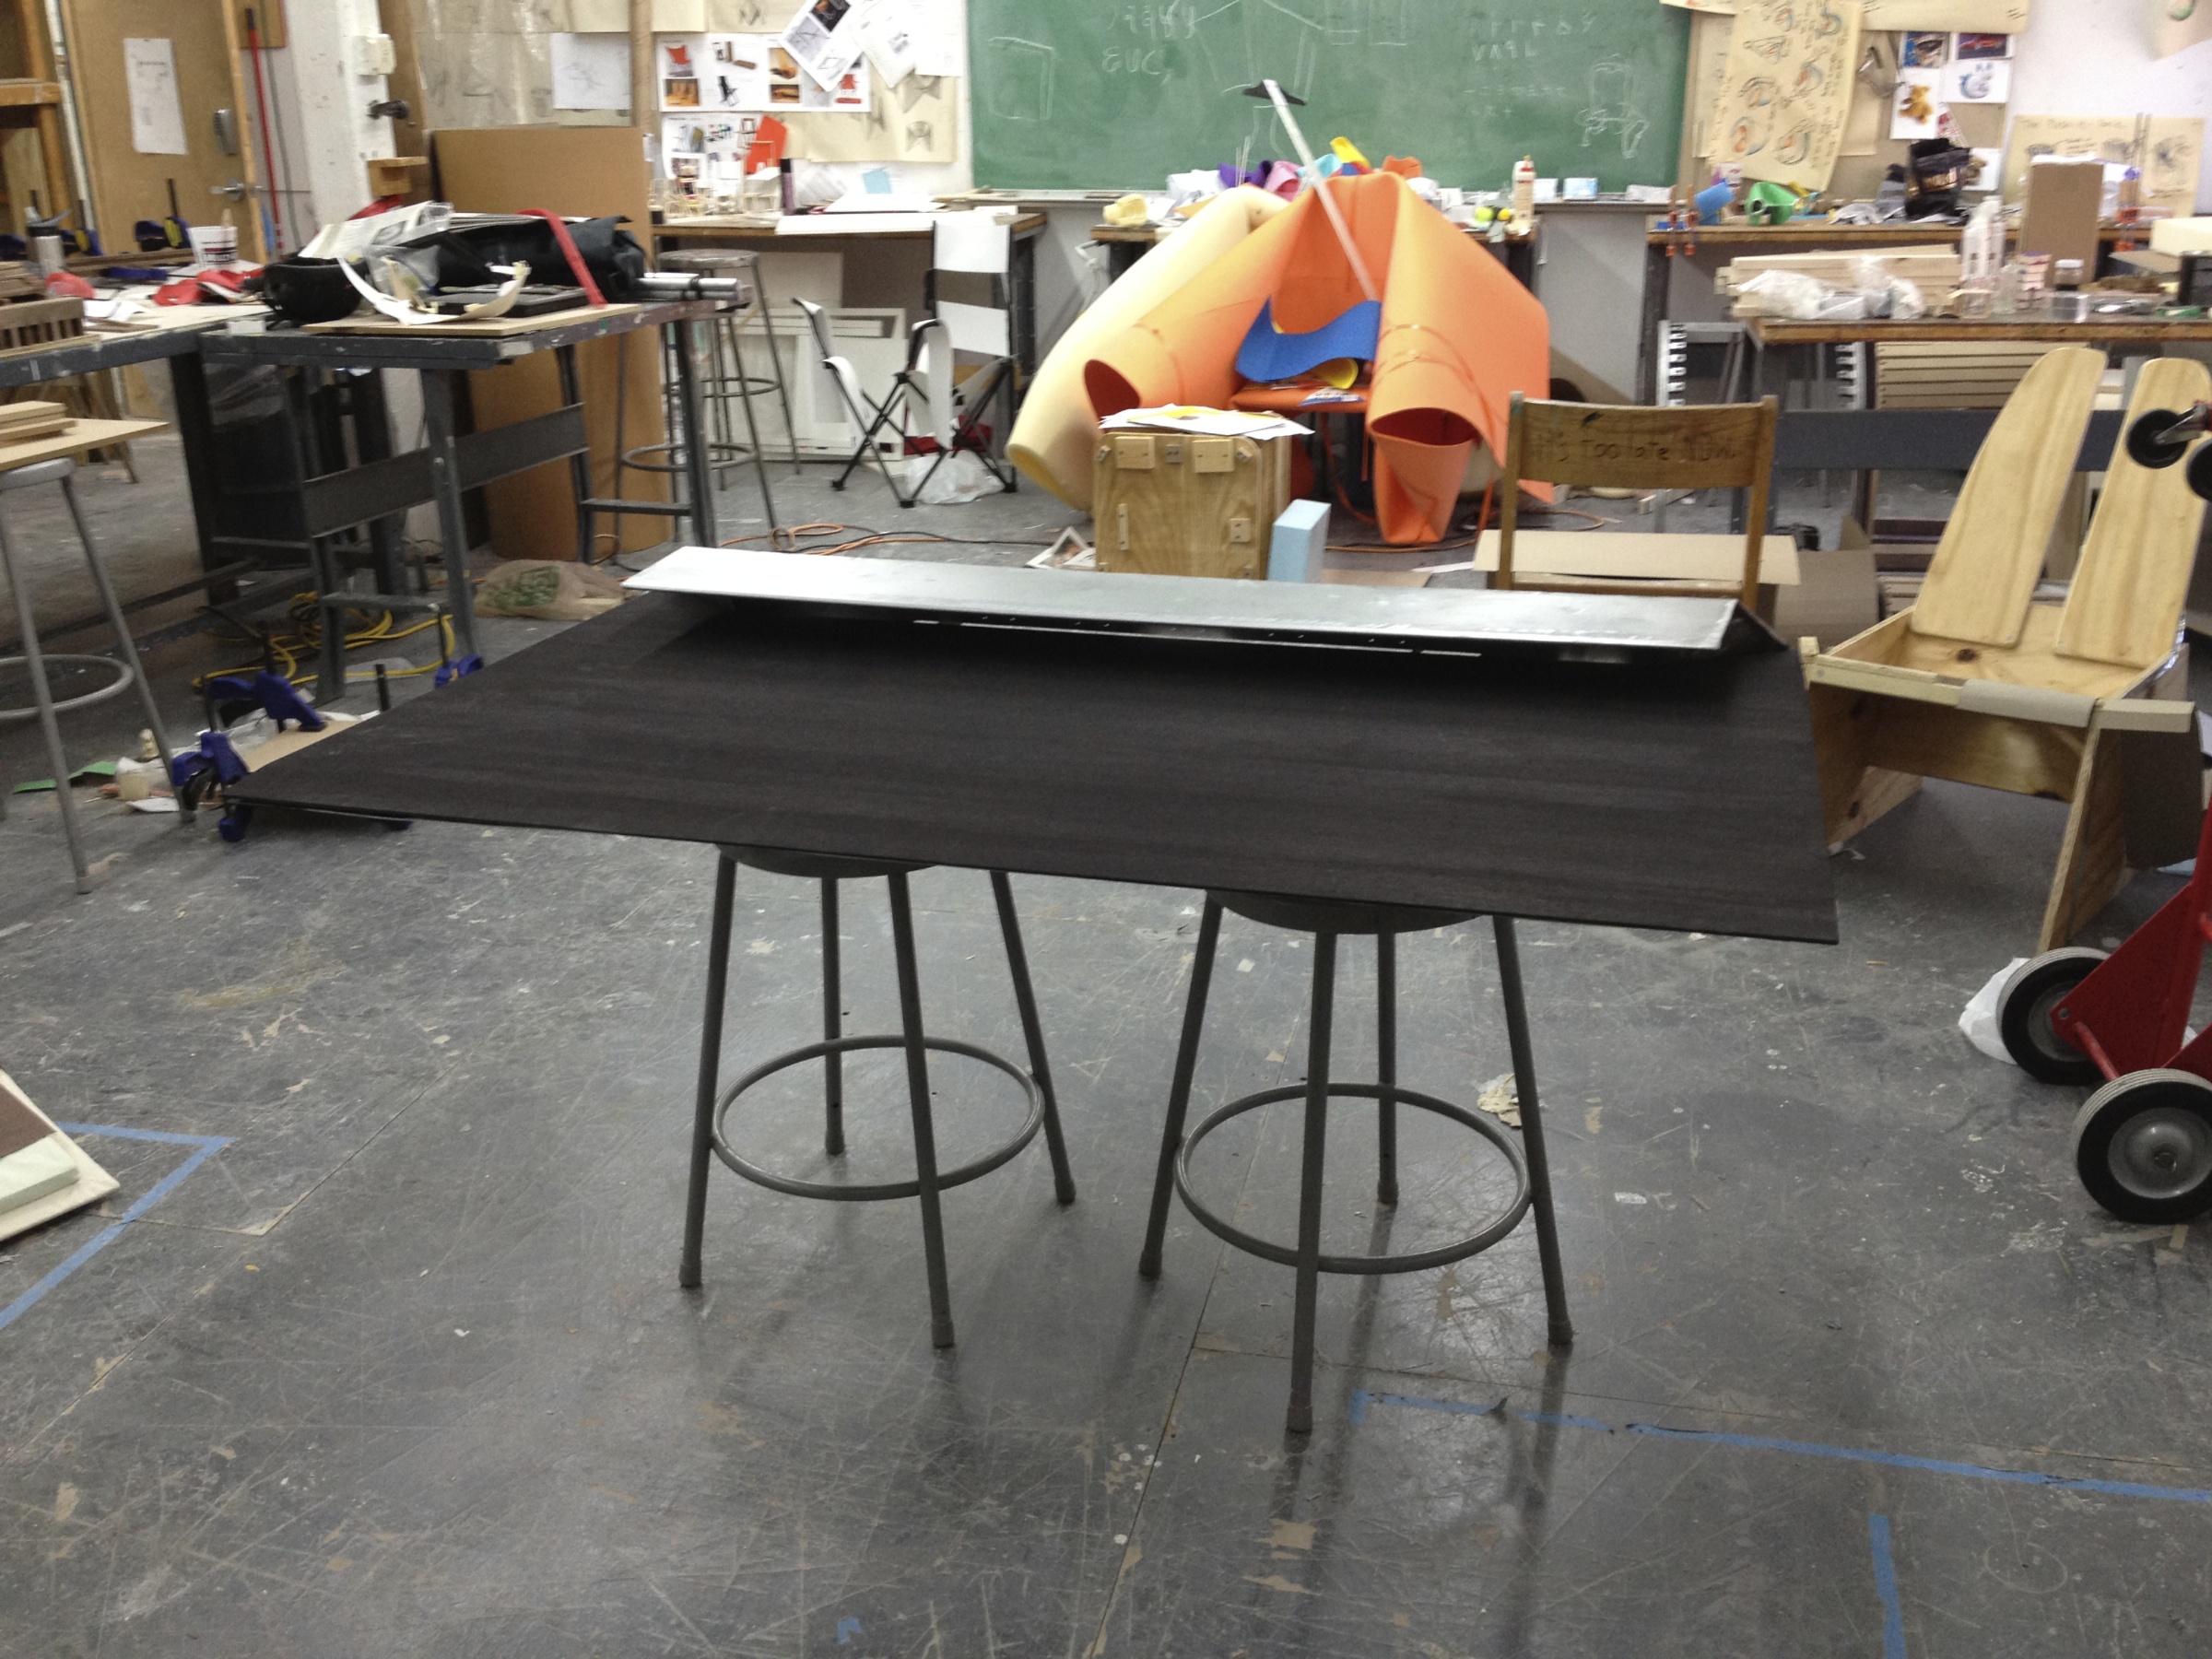  Fitting the table top with the body 